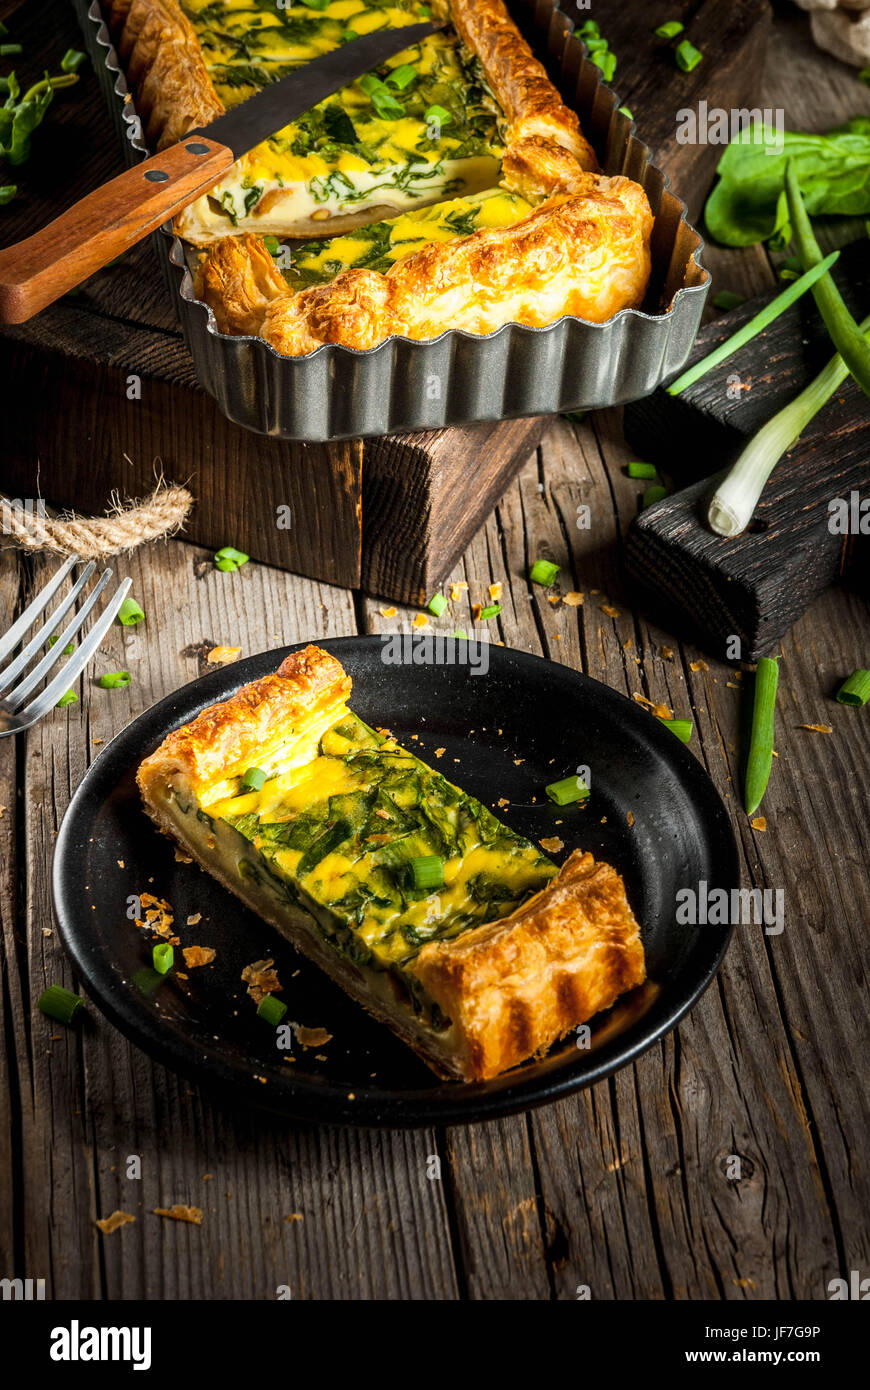 French home cooking. Casserole. Pie. quiche lorraine from puff pastry, with young green onions and spinach. On old wooden rustic table. Cut. In form f Stock Photo